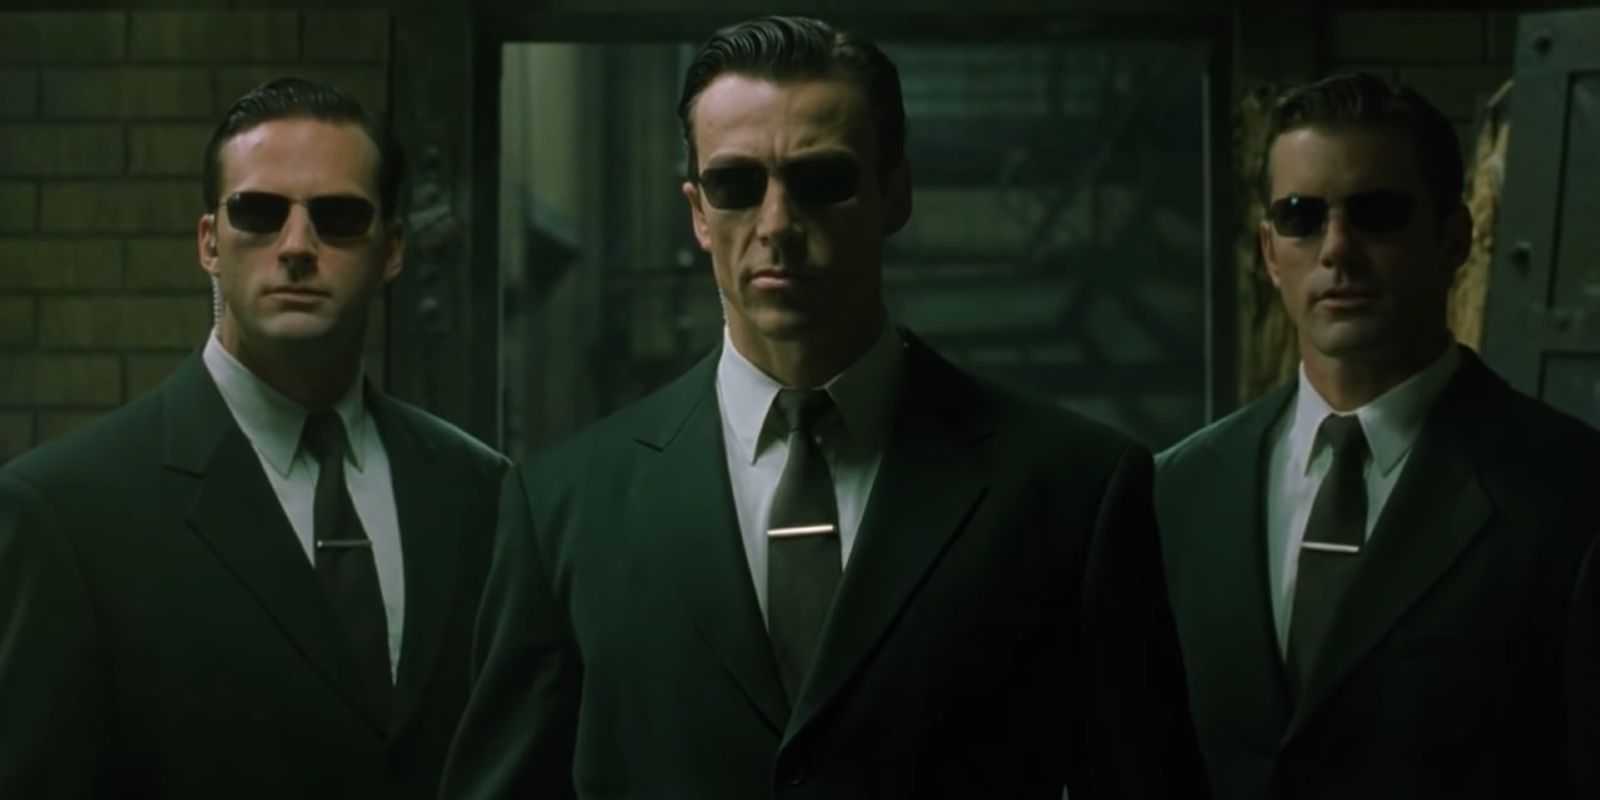 Three Agents entering the resistance hideout in The Matrix Reloaded